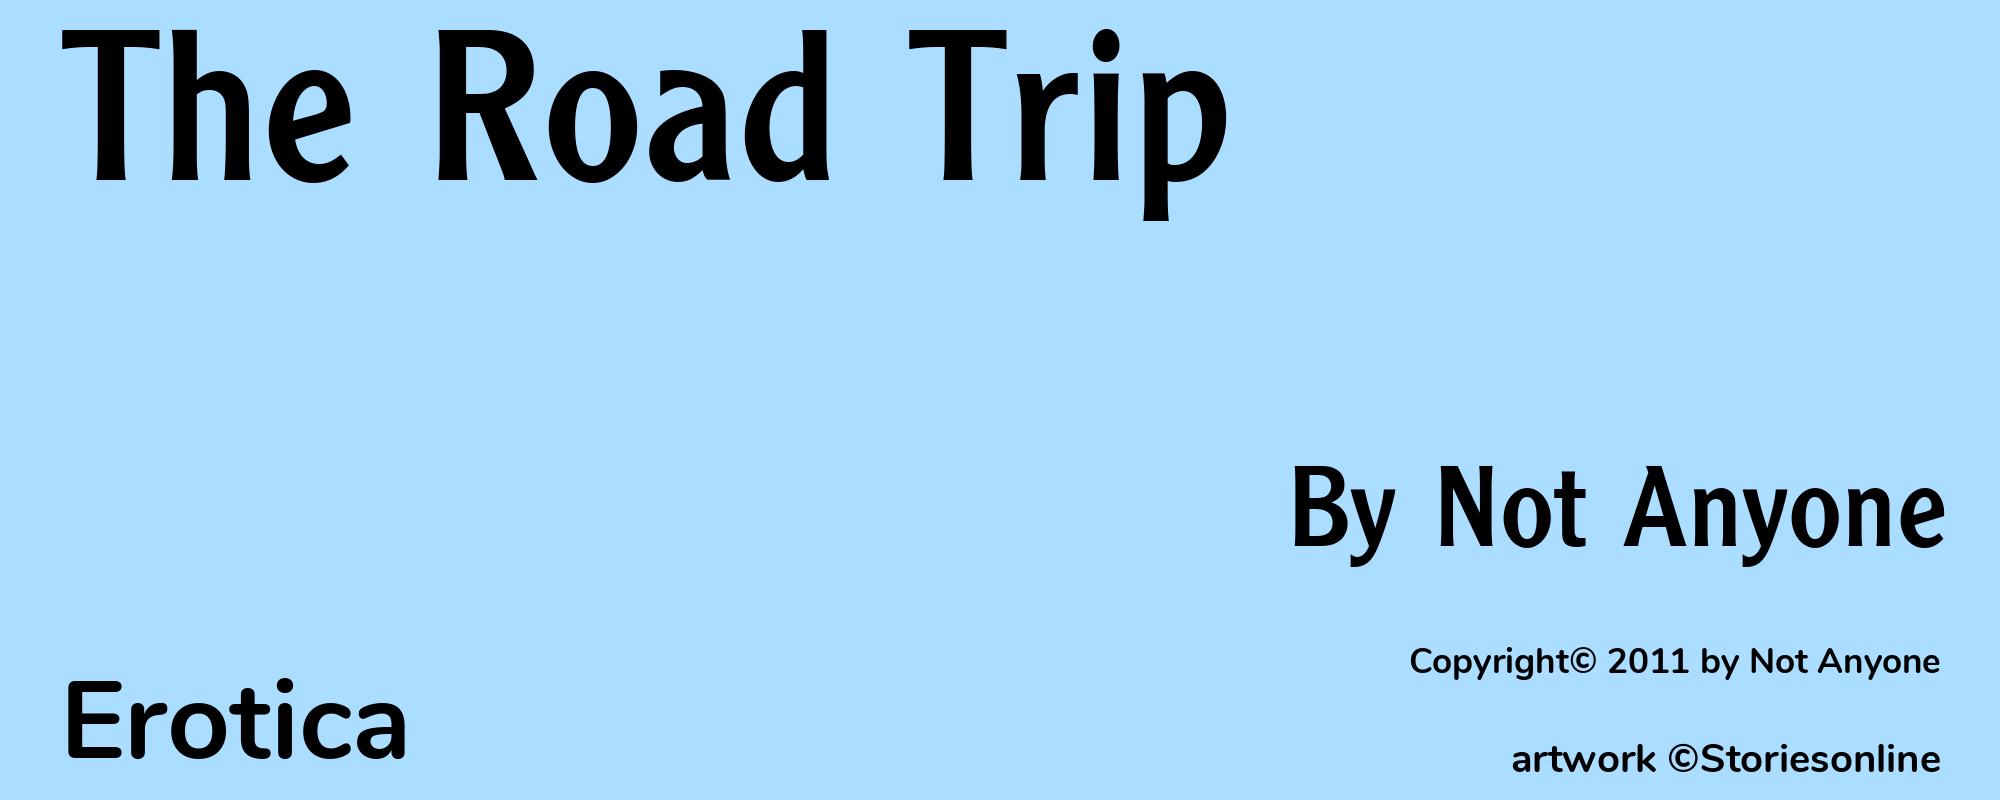 The Road Trip - Cover